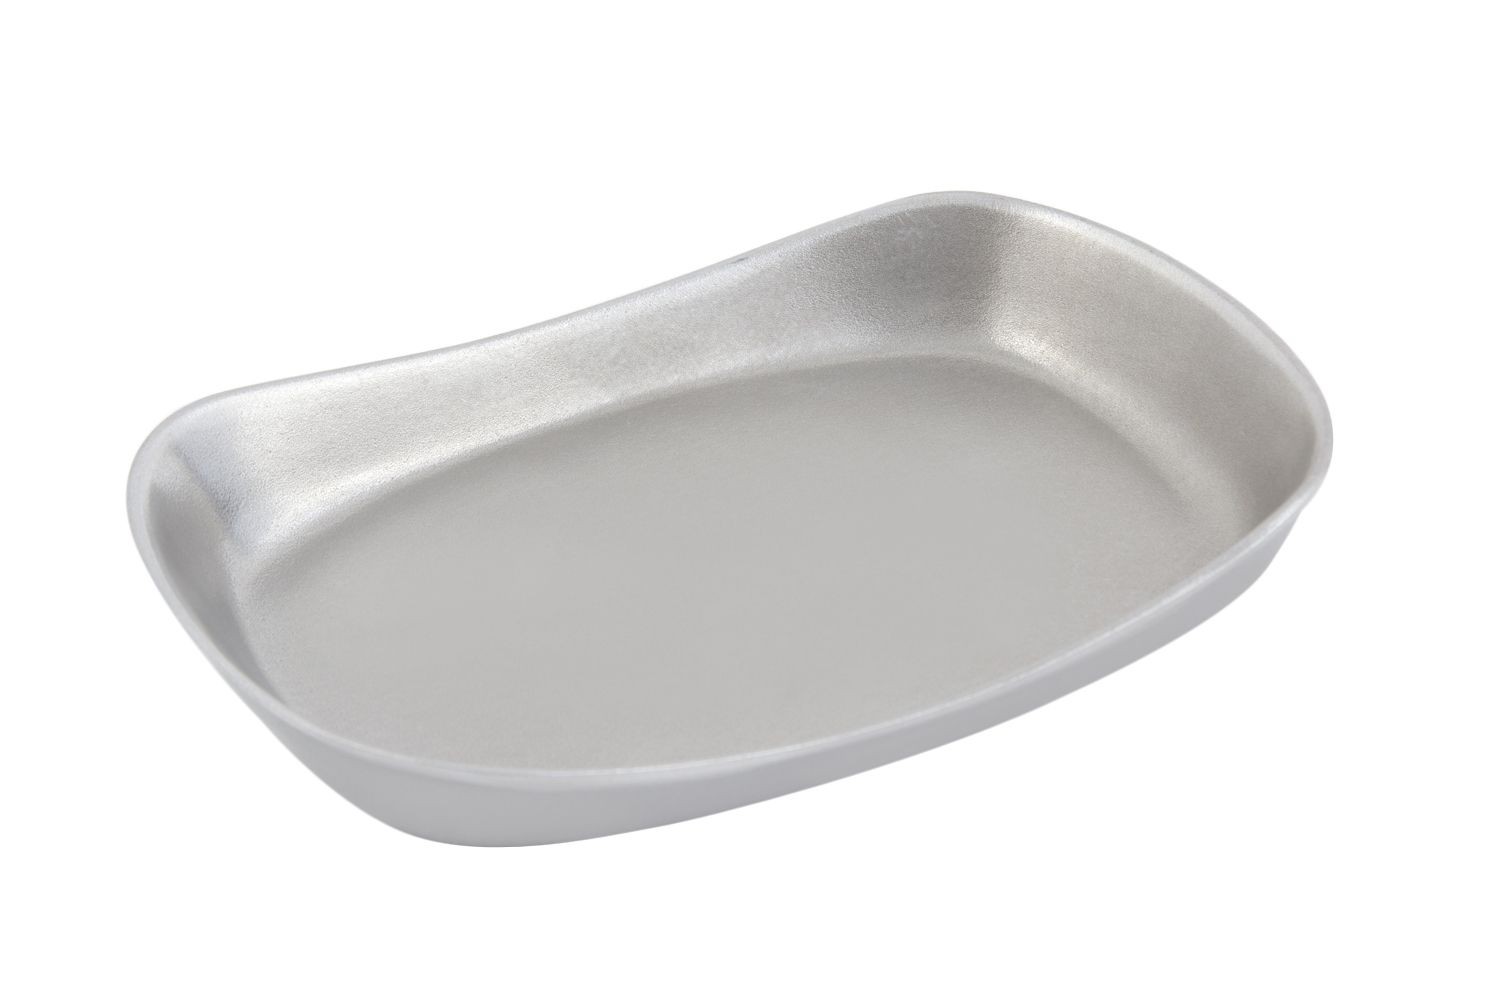 Bon Chef 9001P Bread and Celery Tray, Pewter Glo 6 1/2" x 9 1/4", Set of 6